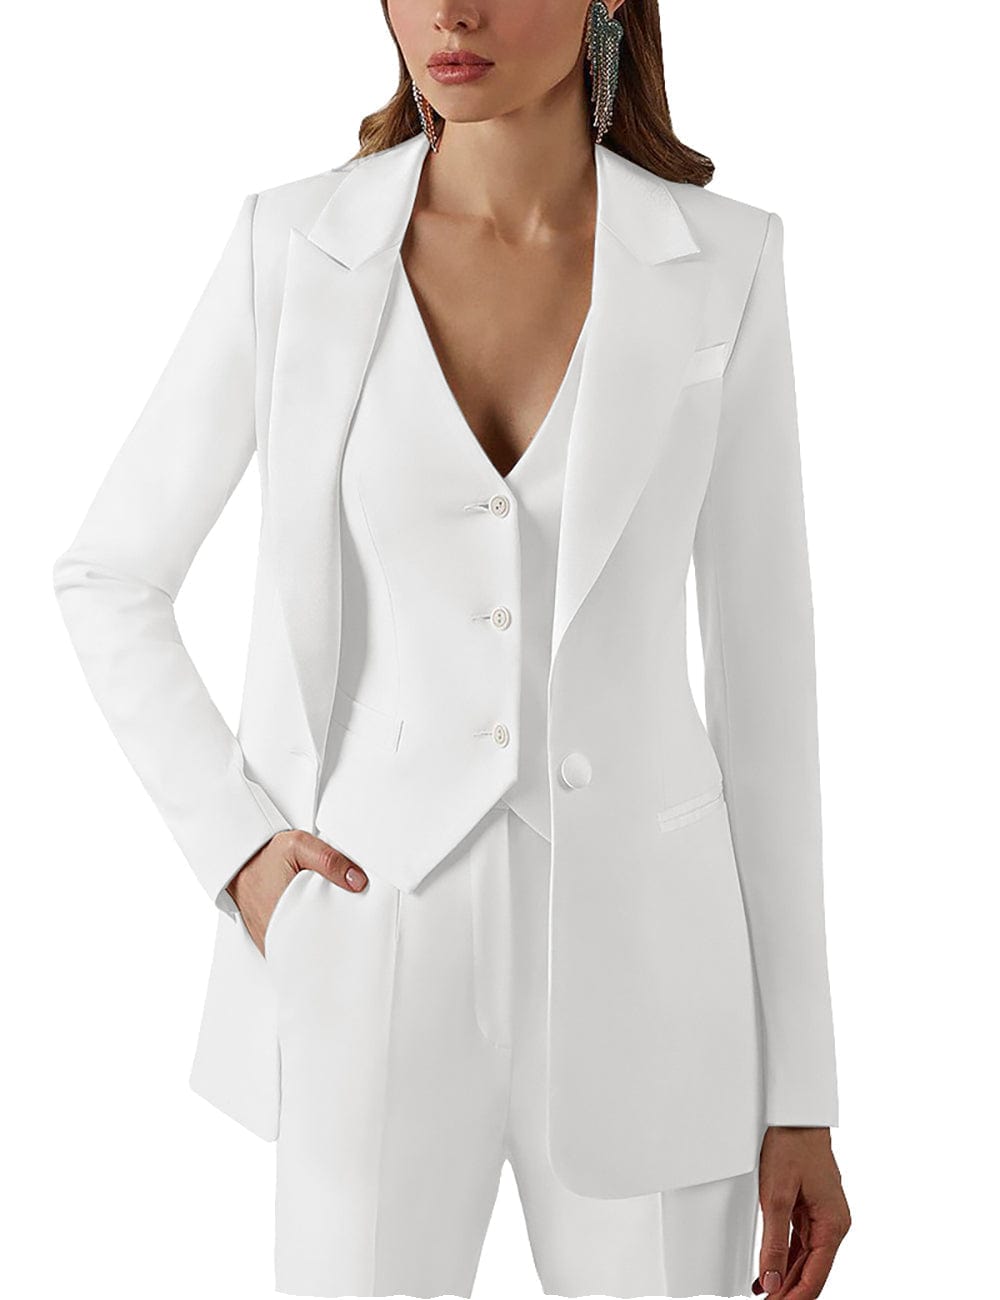 21 Chic Wedding Suits For Women Who Want to Rock a Bridal Suit